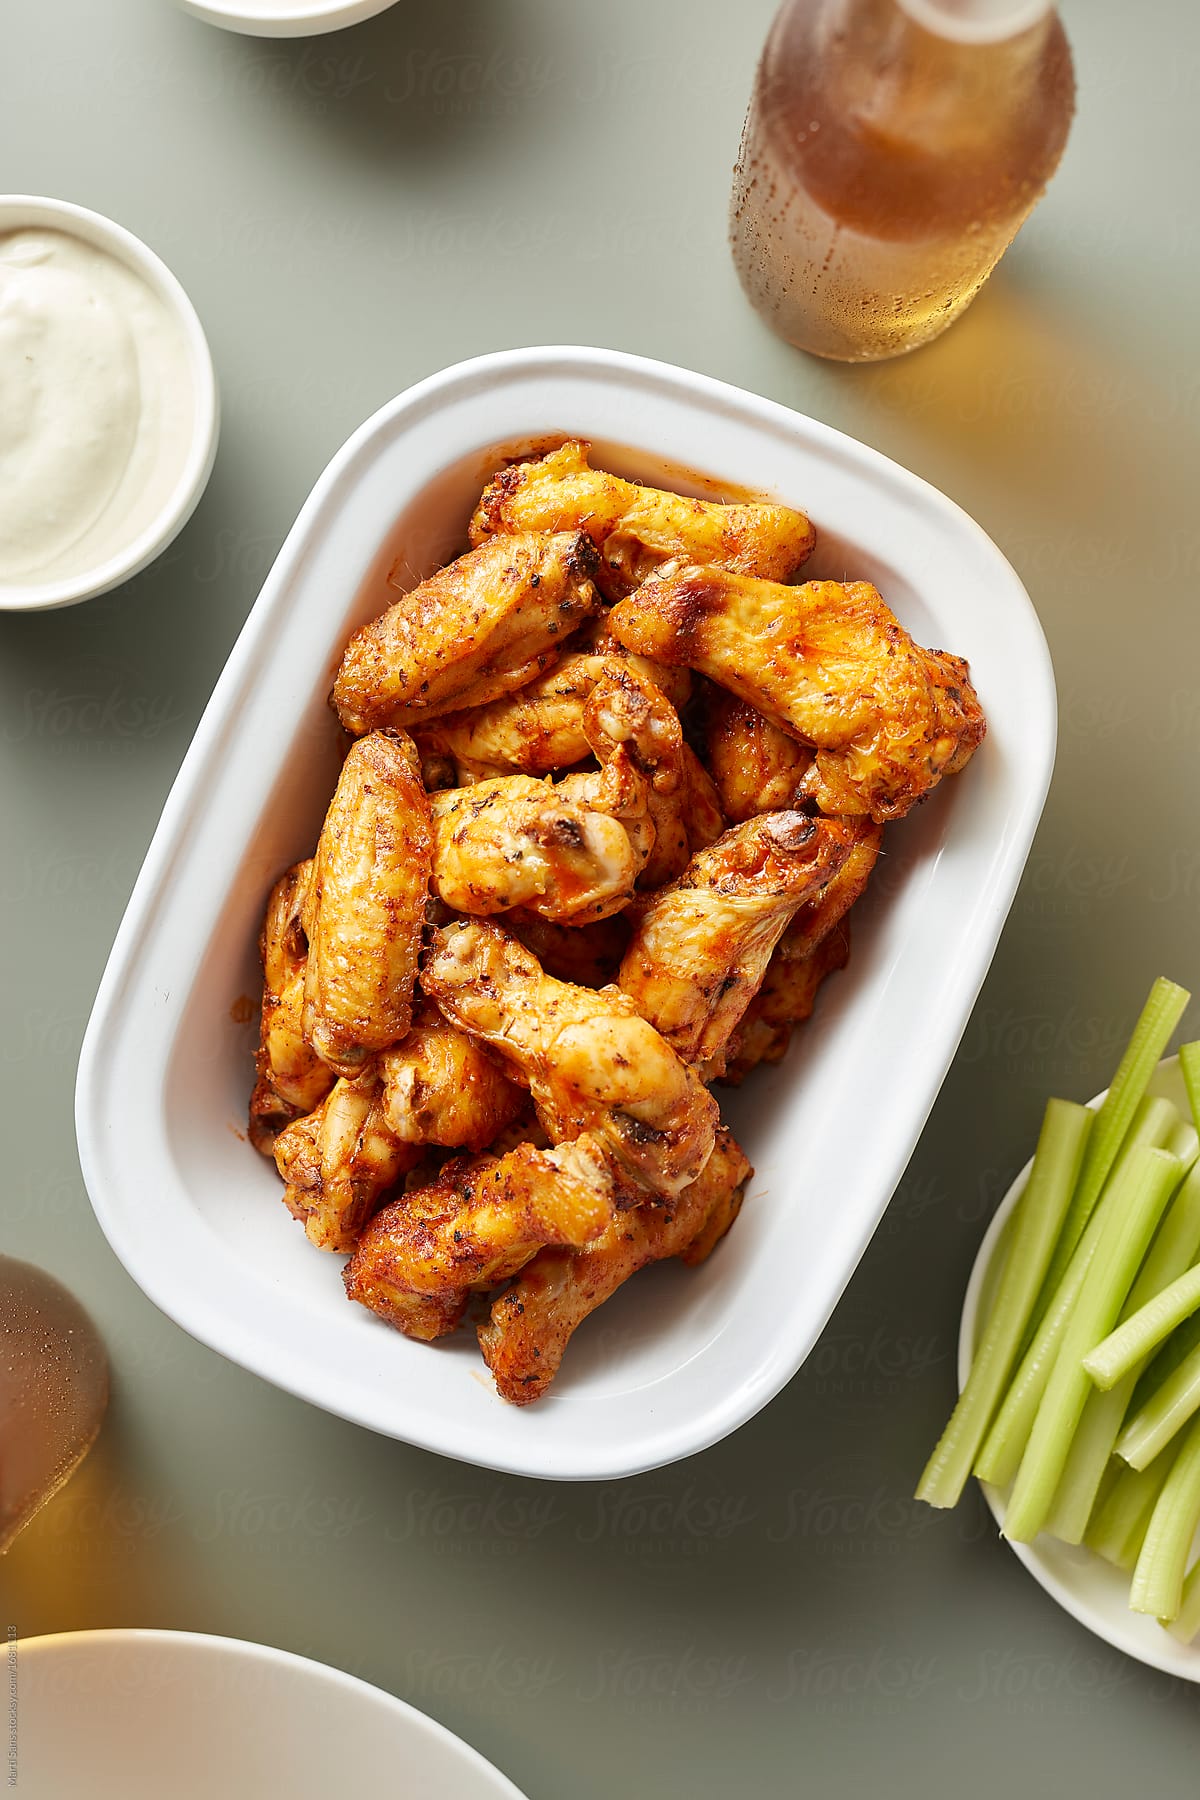 Juicy chicken wings in bowl served with celery and beer